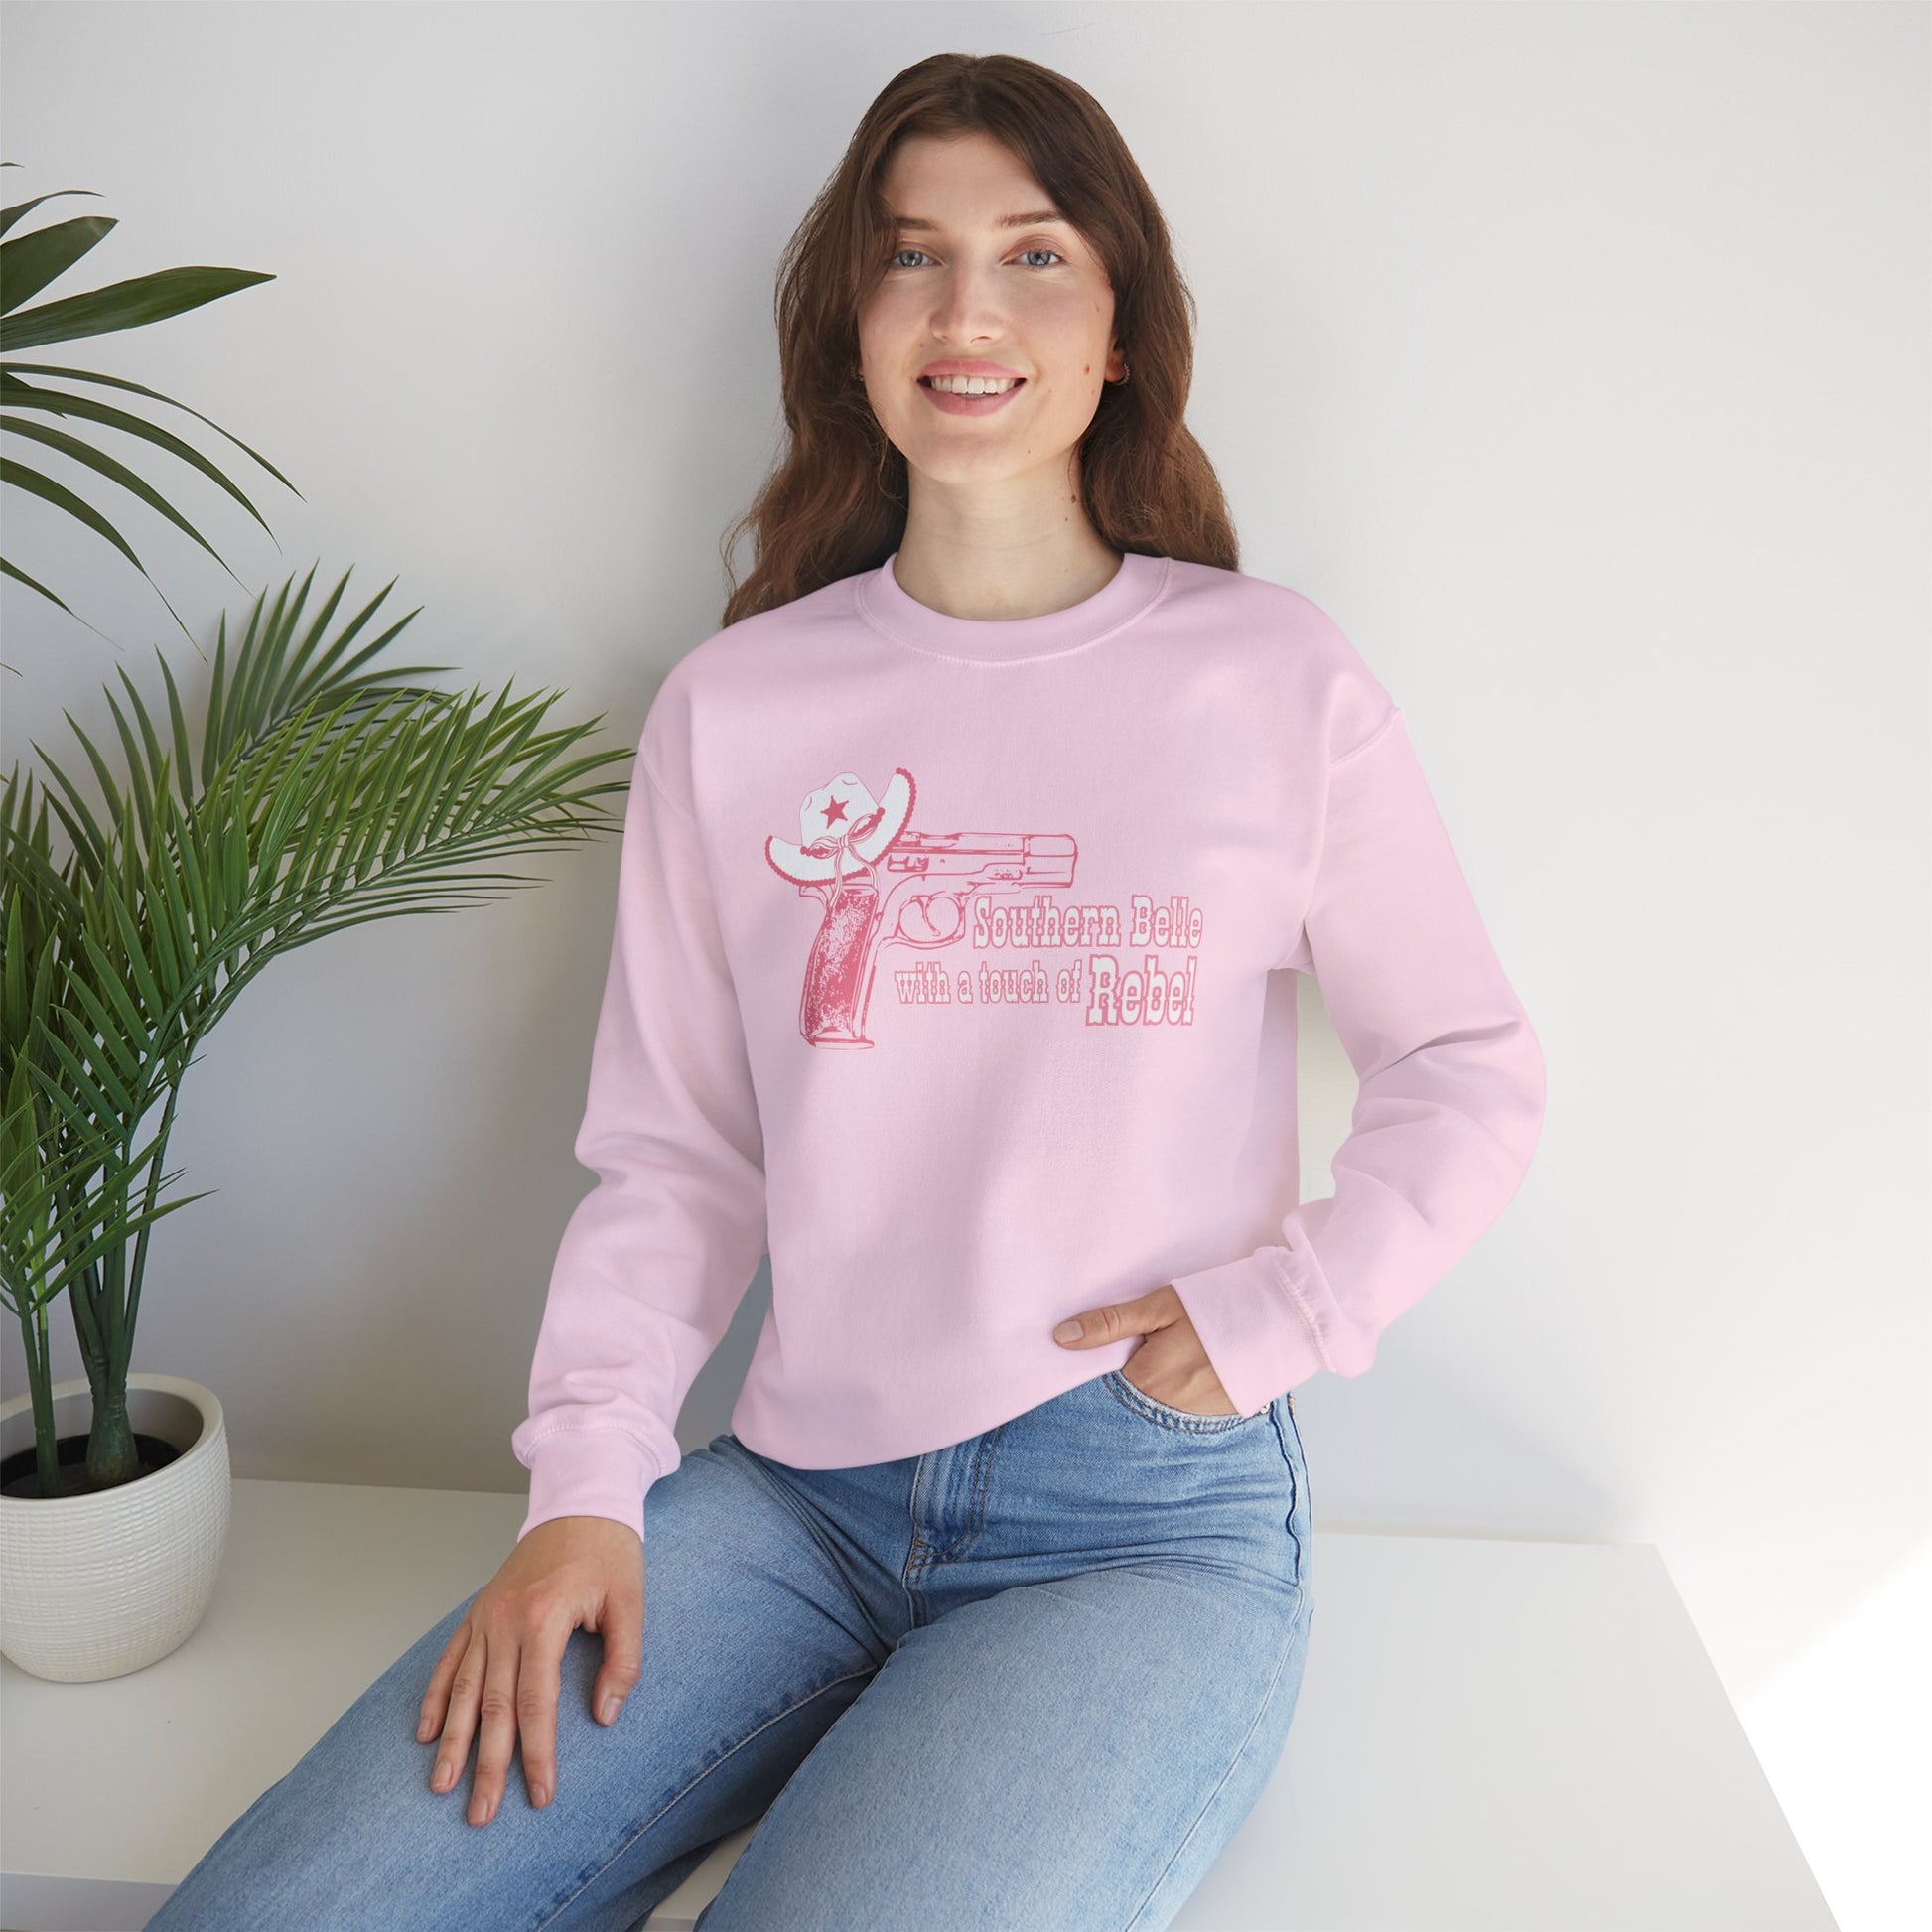 Southern Belle With A Touch Of Rebel Crewneck Sweatshirt Light Pink